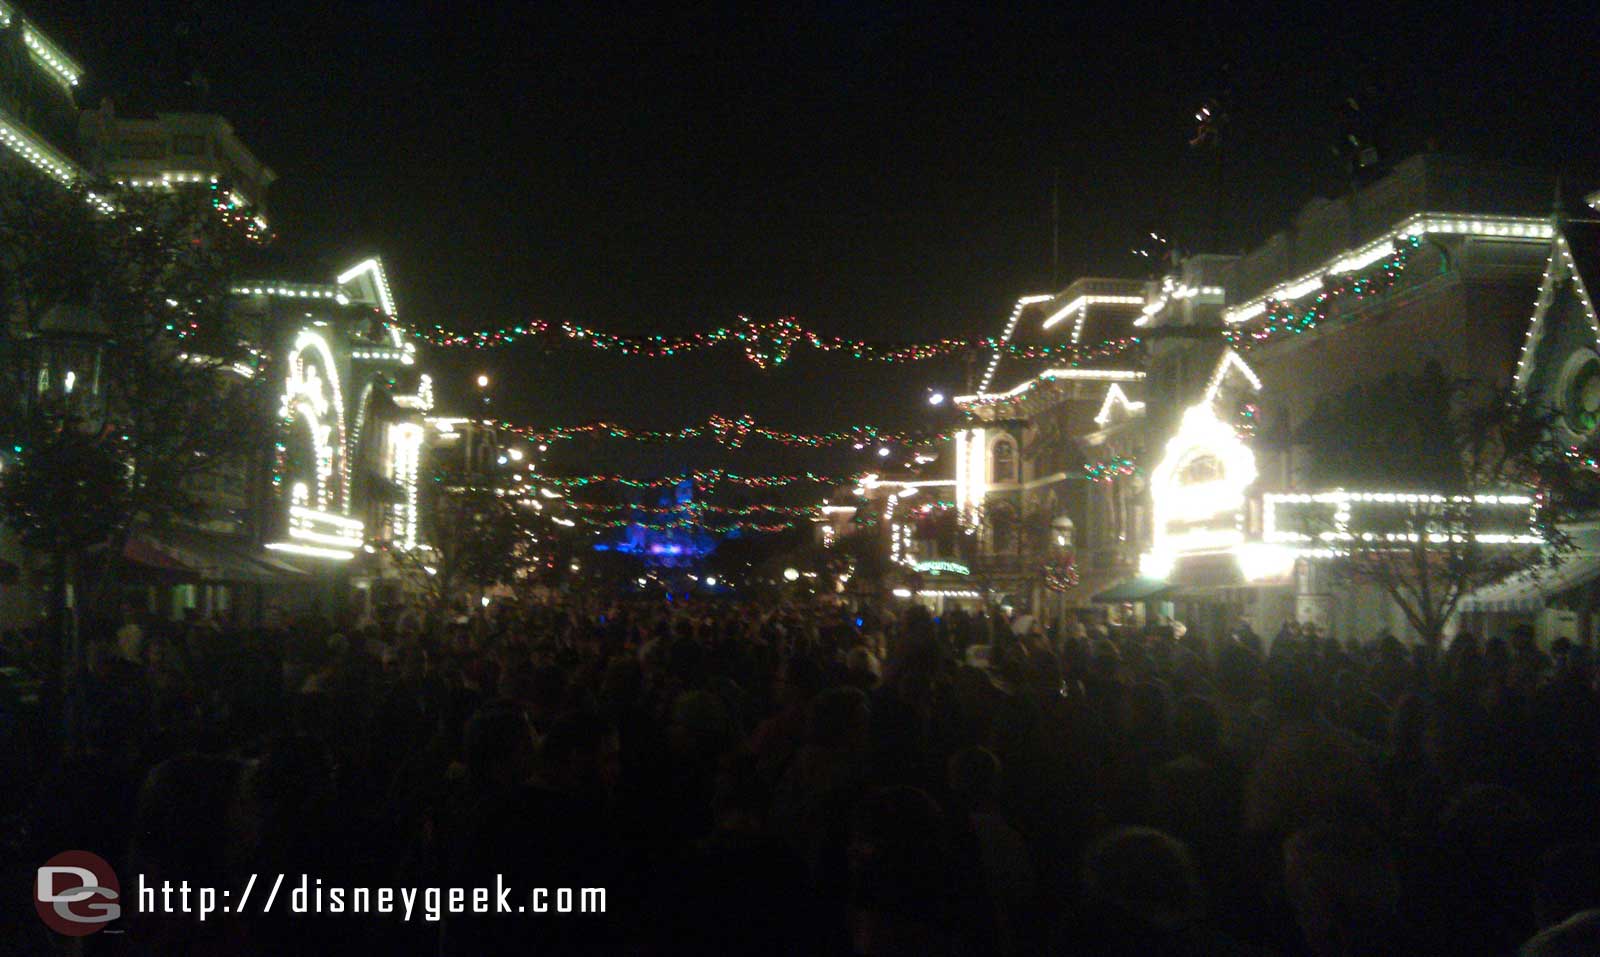 Main Street after the Candlelight. Full of guests but they are moving still.